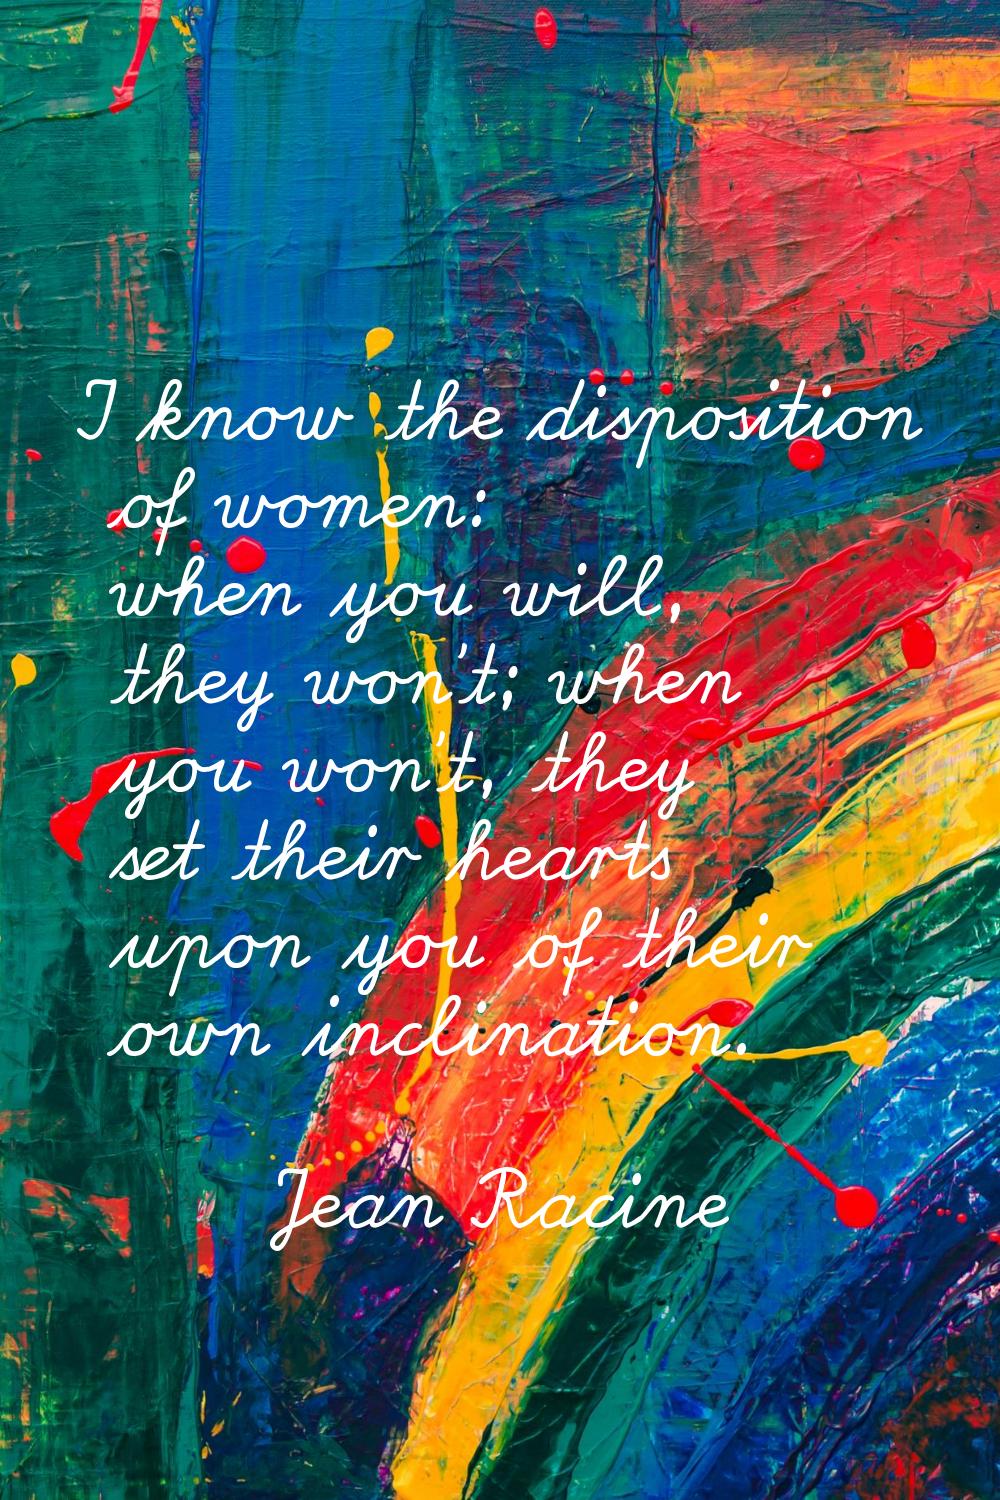 I know the disposition of women: when you will, they won't; when you won't, they set their hearts u